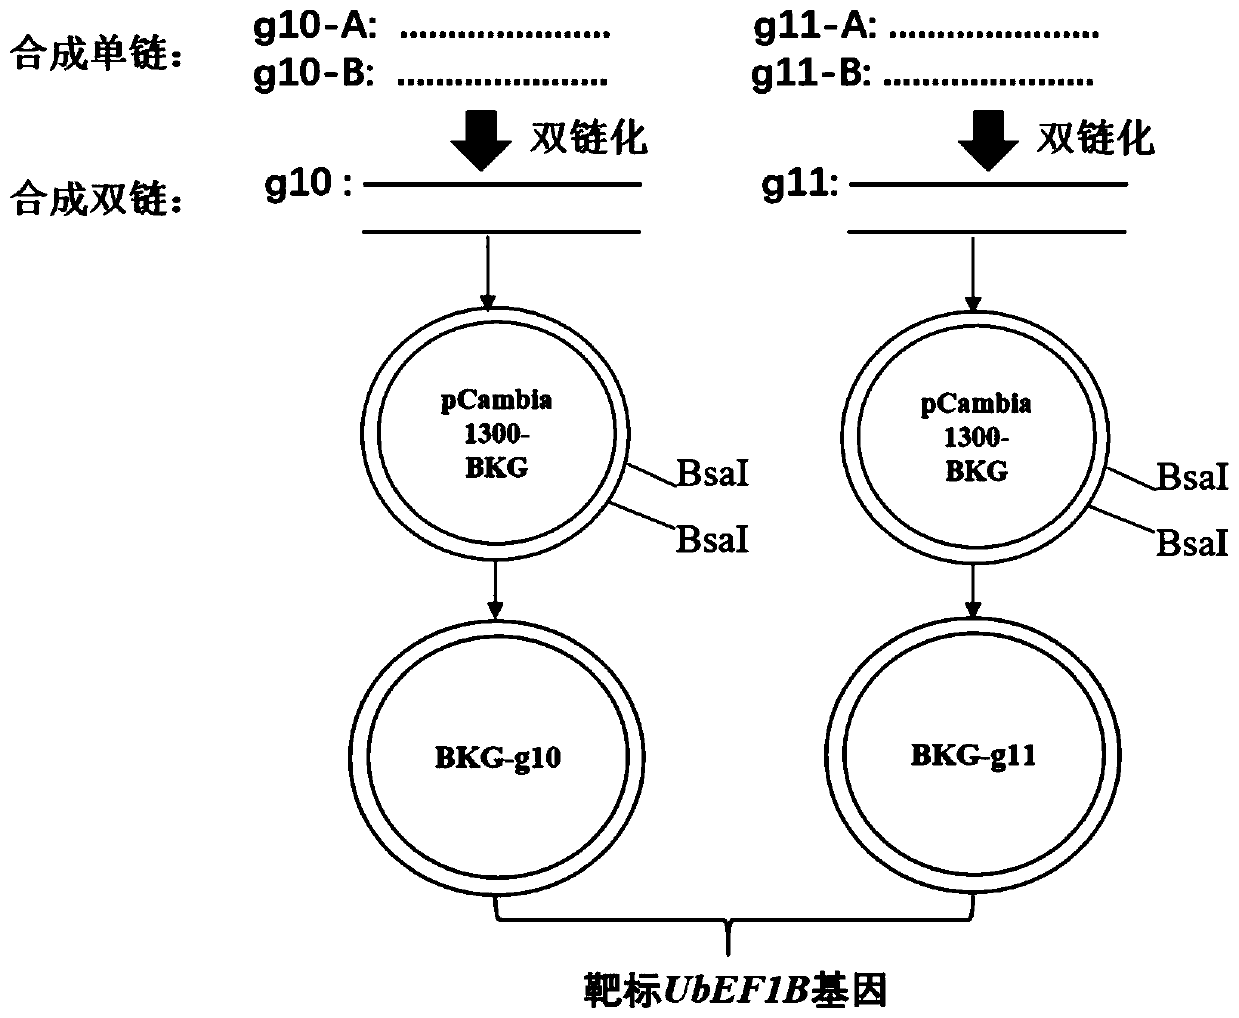 Vector for editing nicotiana benthamiana gene based on CRISPR/Cas9 as well as construction method and application thereof